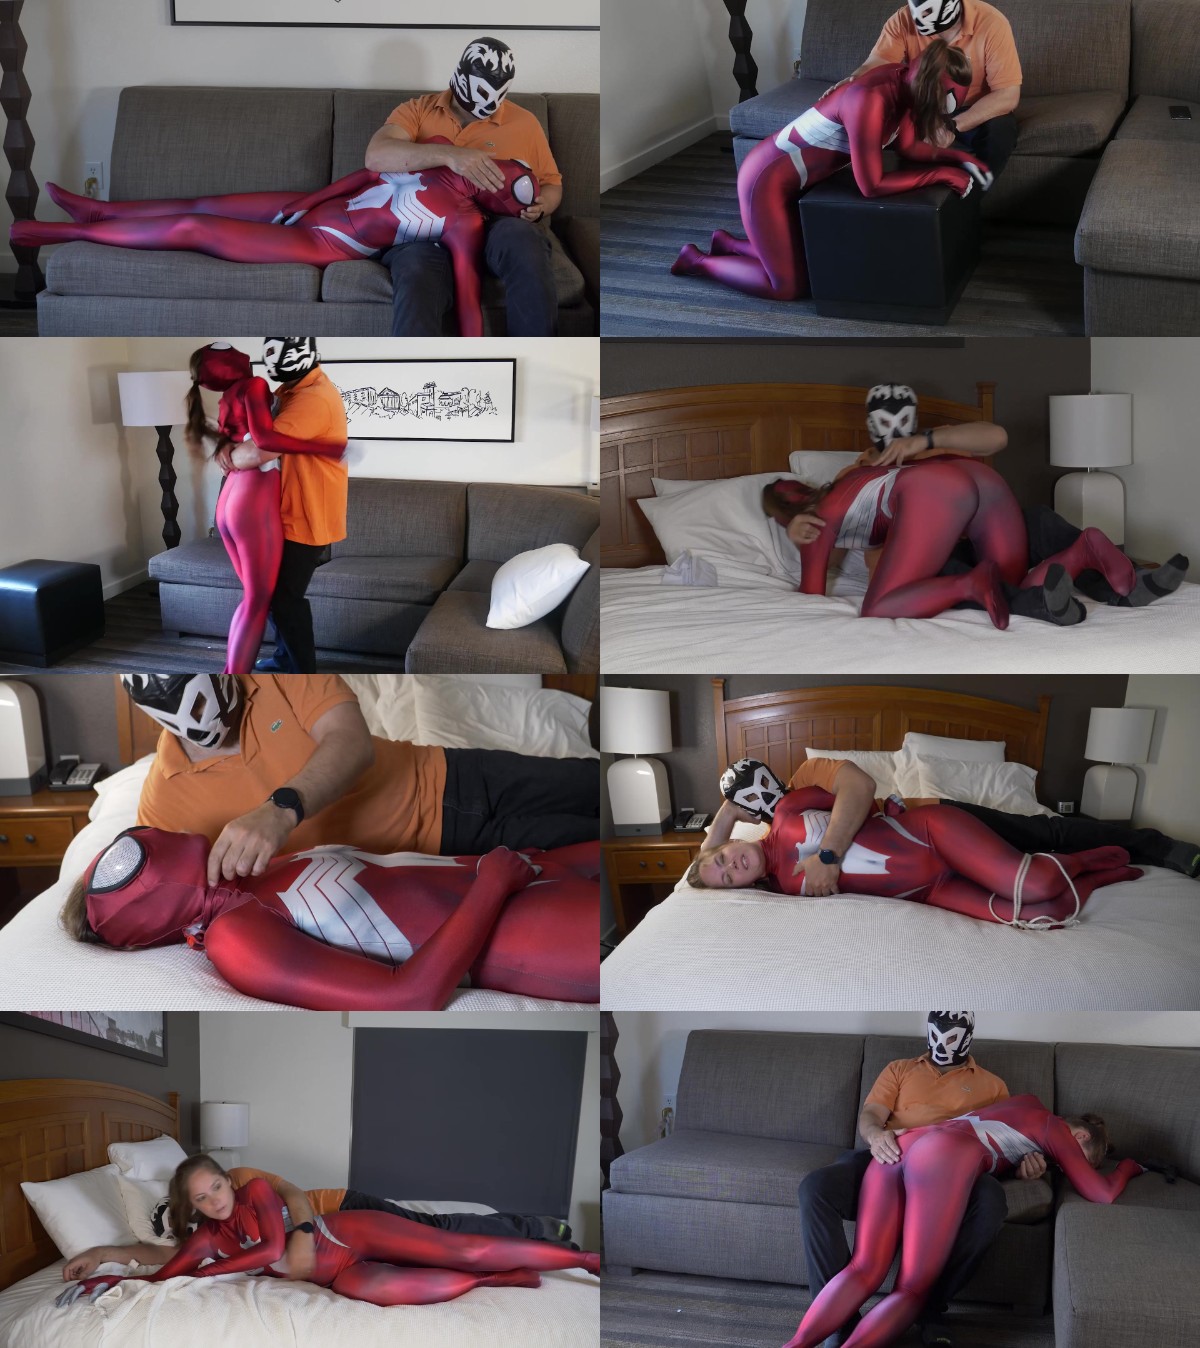 Spider Woman Beauty Sleeps pic